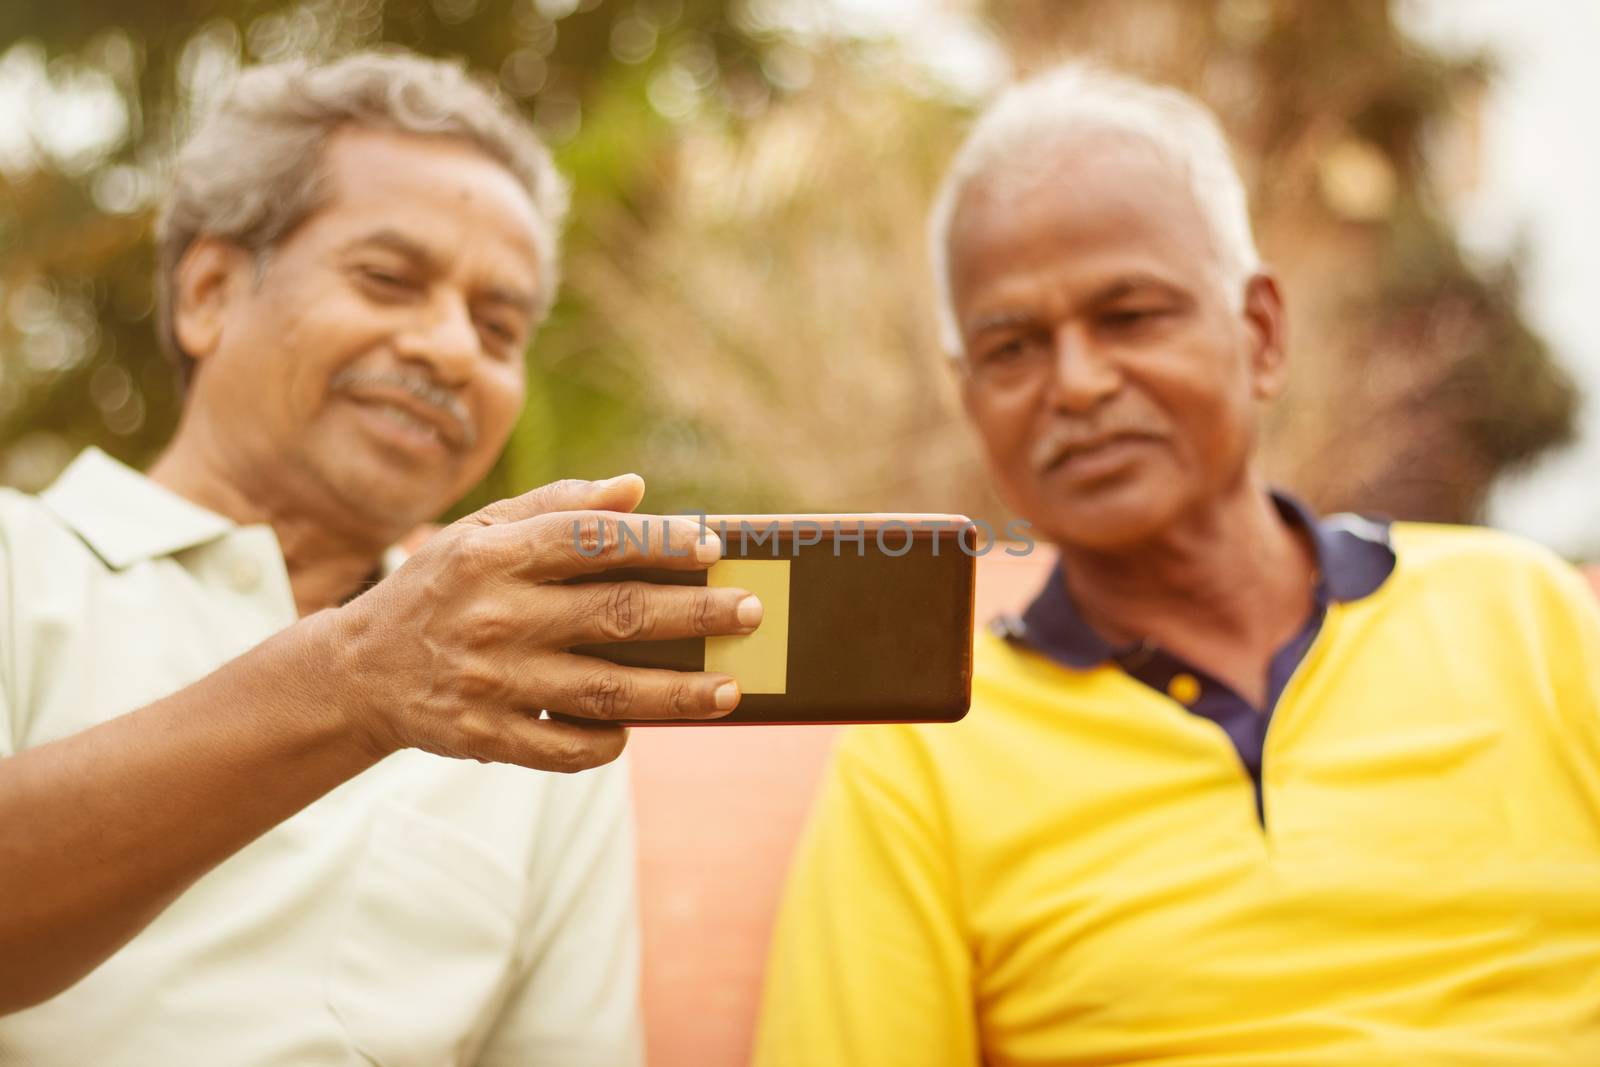 Selective focus on phone two Happy older men busy in watching mobile outdoor - concept of senior people using technology - Two mature old friends having fun at park. by lakshmiprasad.maski@gmai.com